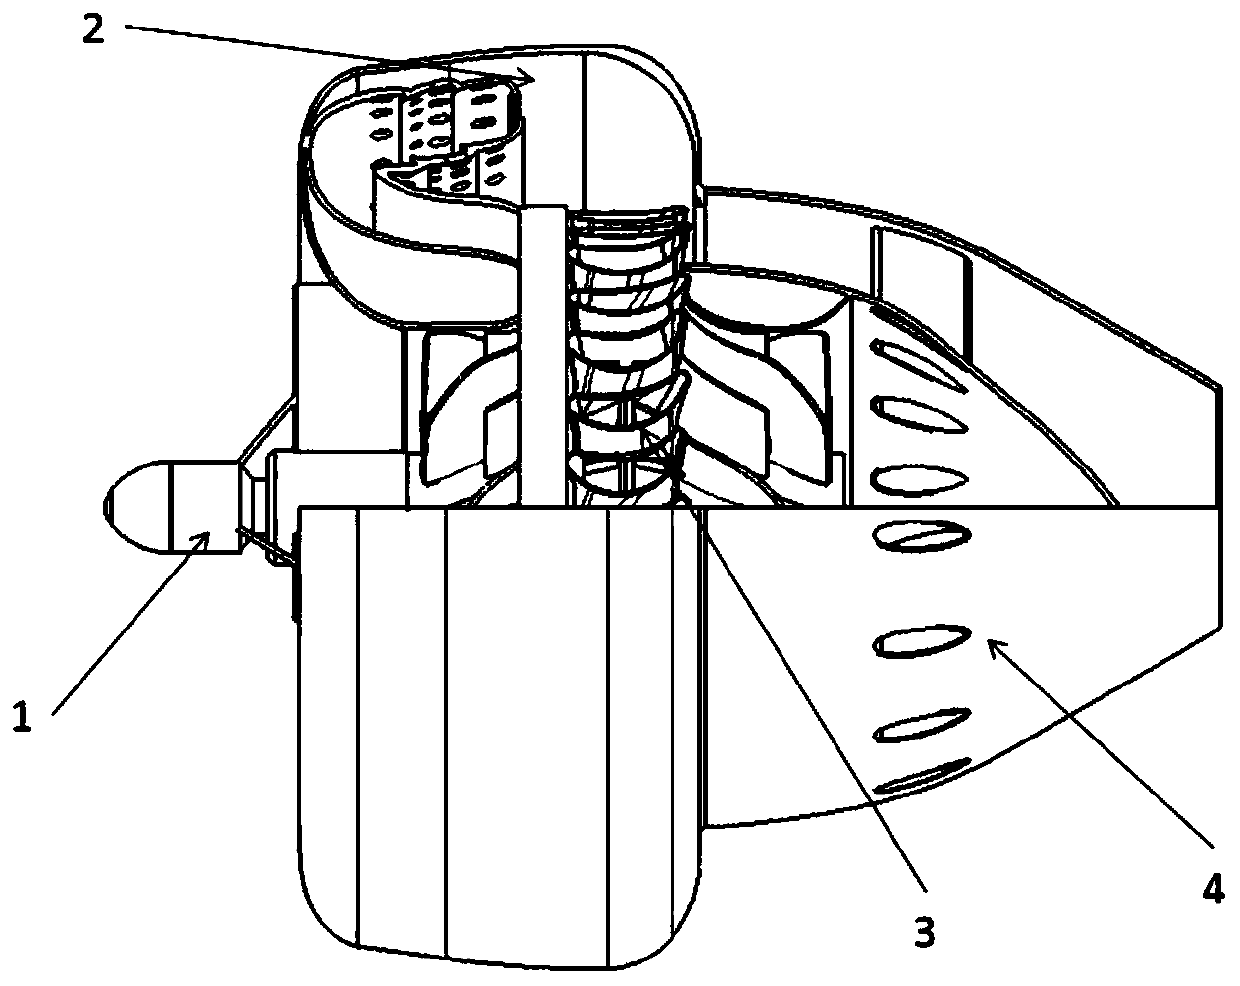 Micro-turbojet engine for novel double-face compound impeller